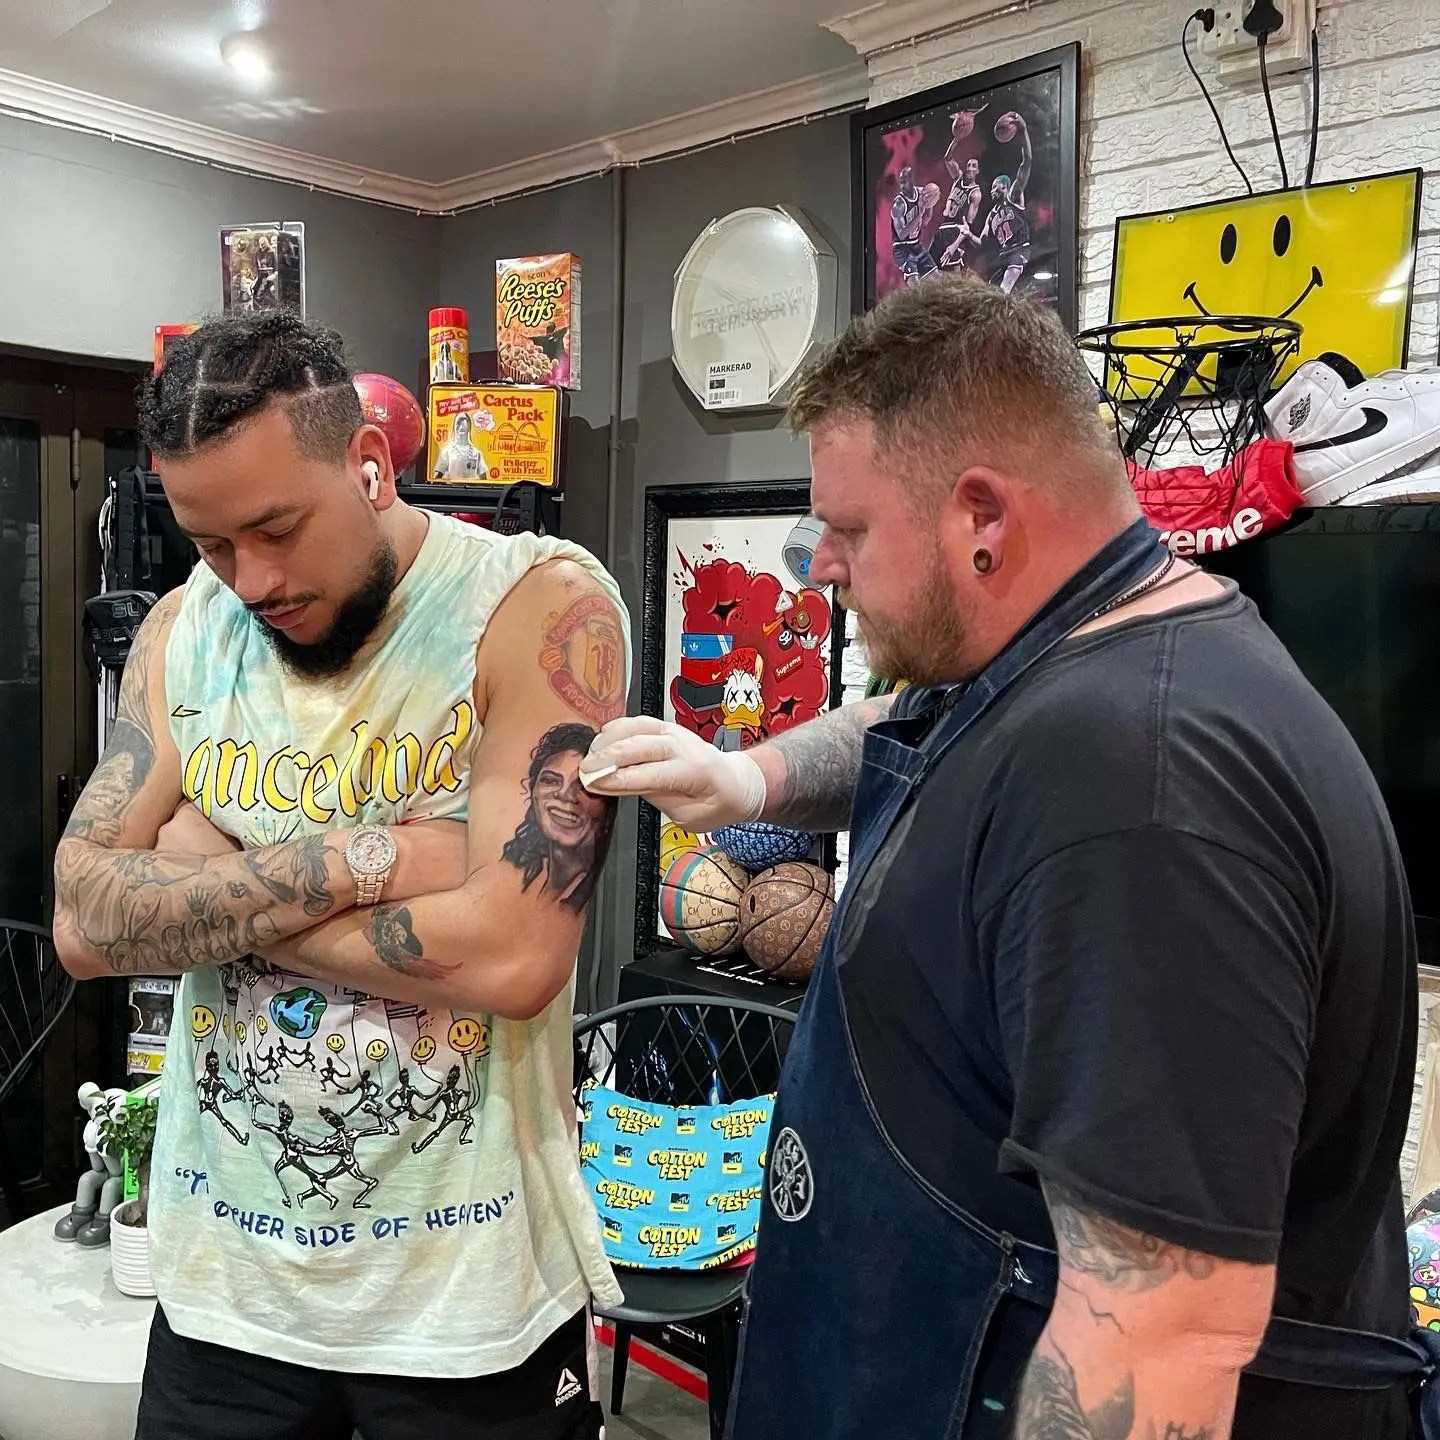 Photos – AKA adds another MJ tattoo to his collection